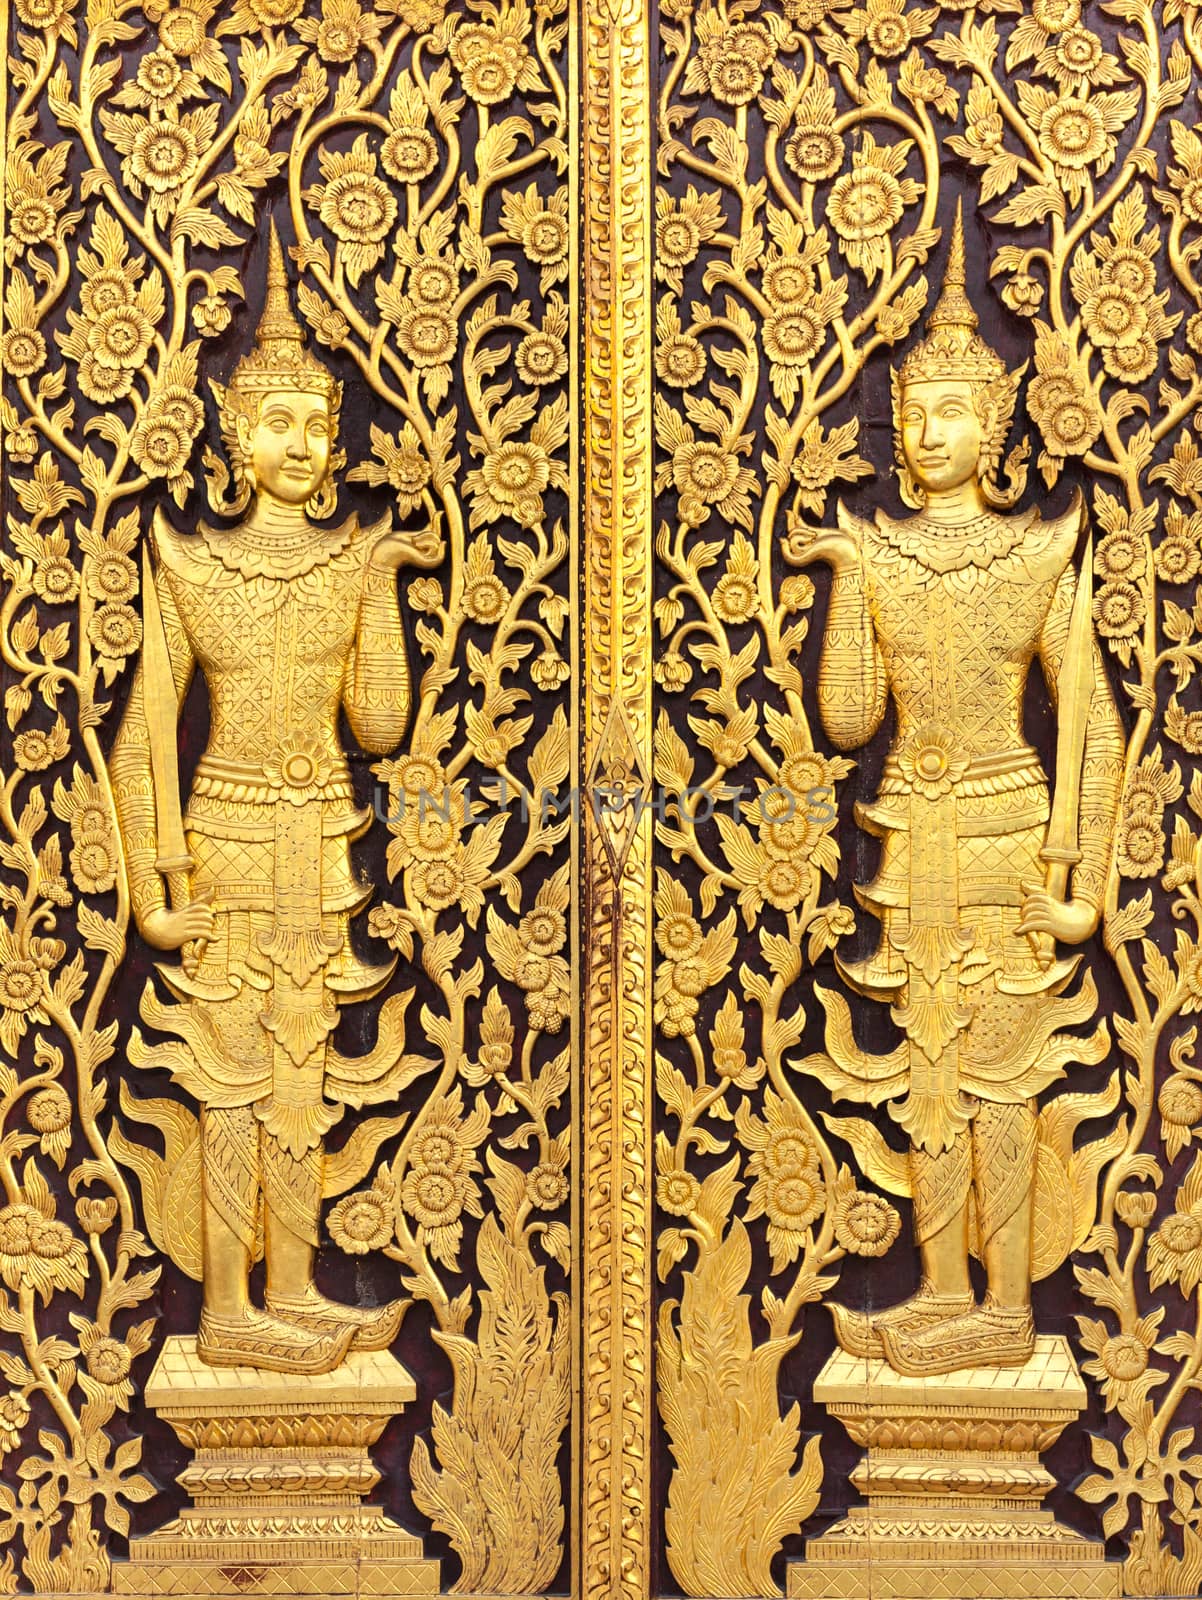 Thai culture gold sculpture on the temple wall by nopparats